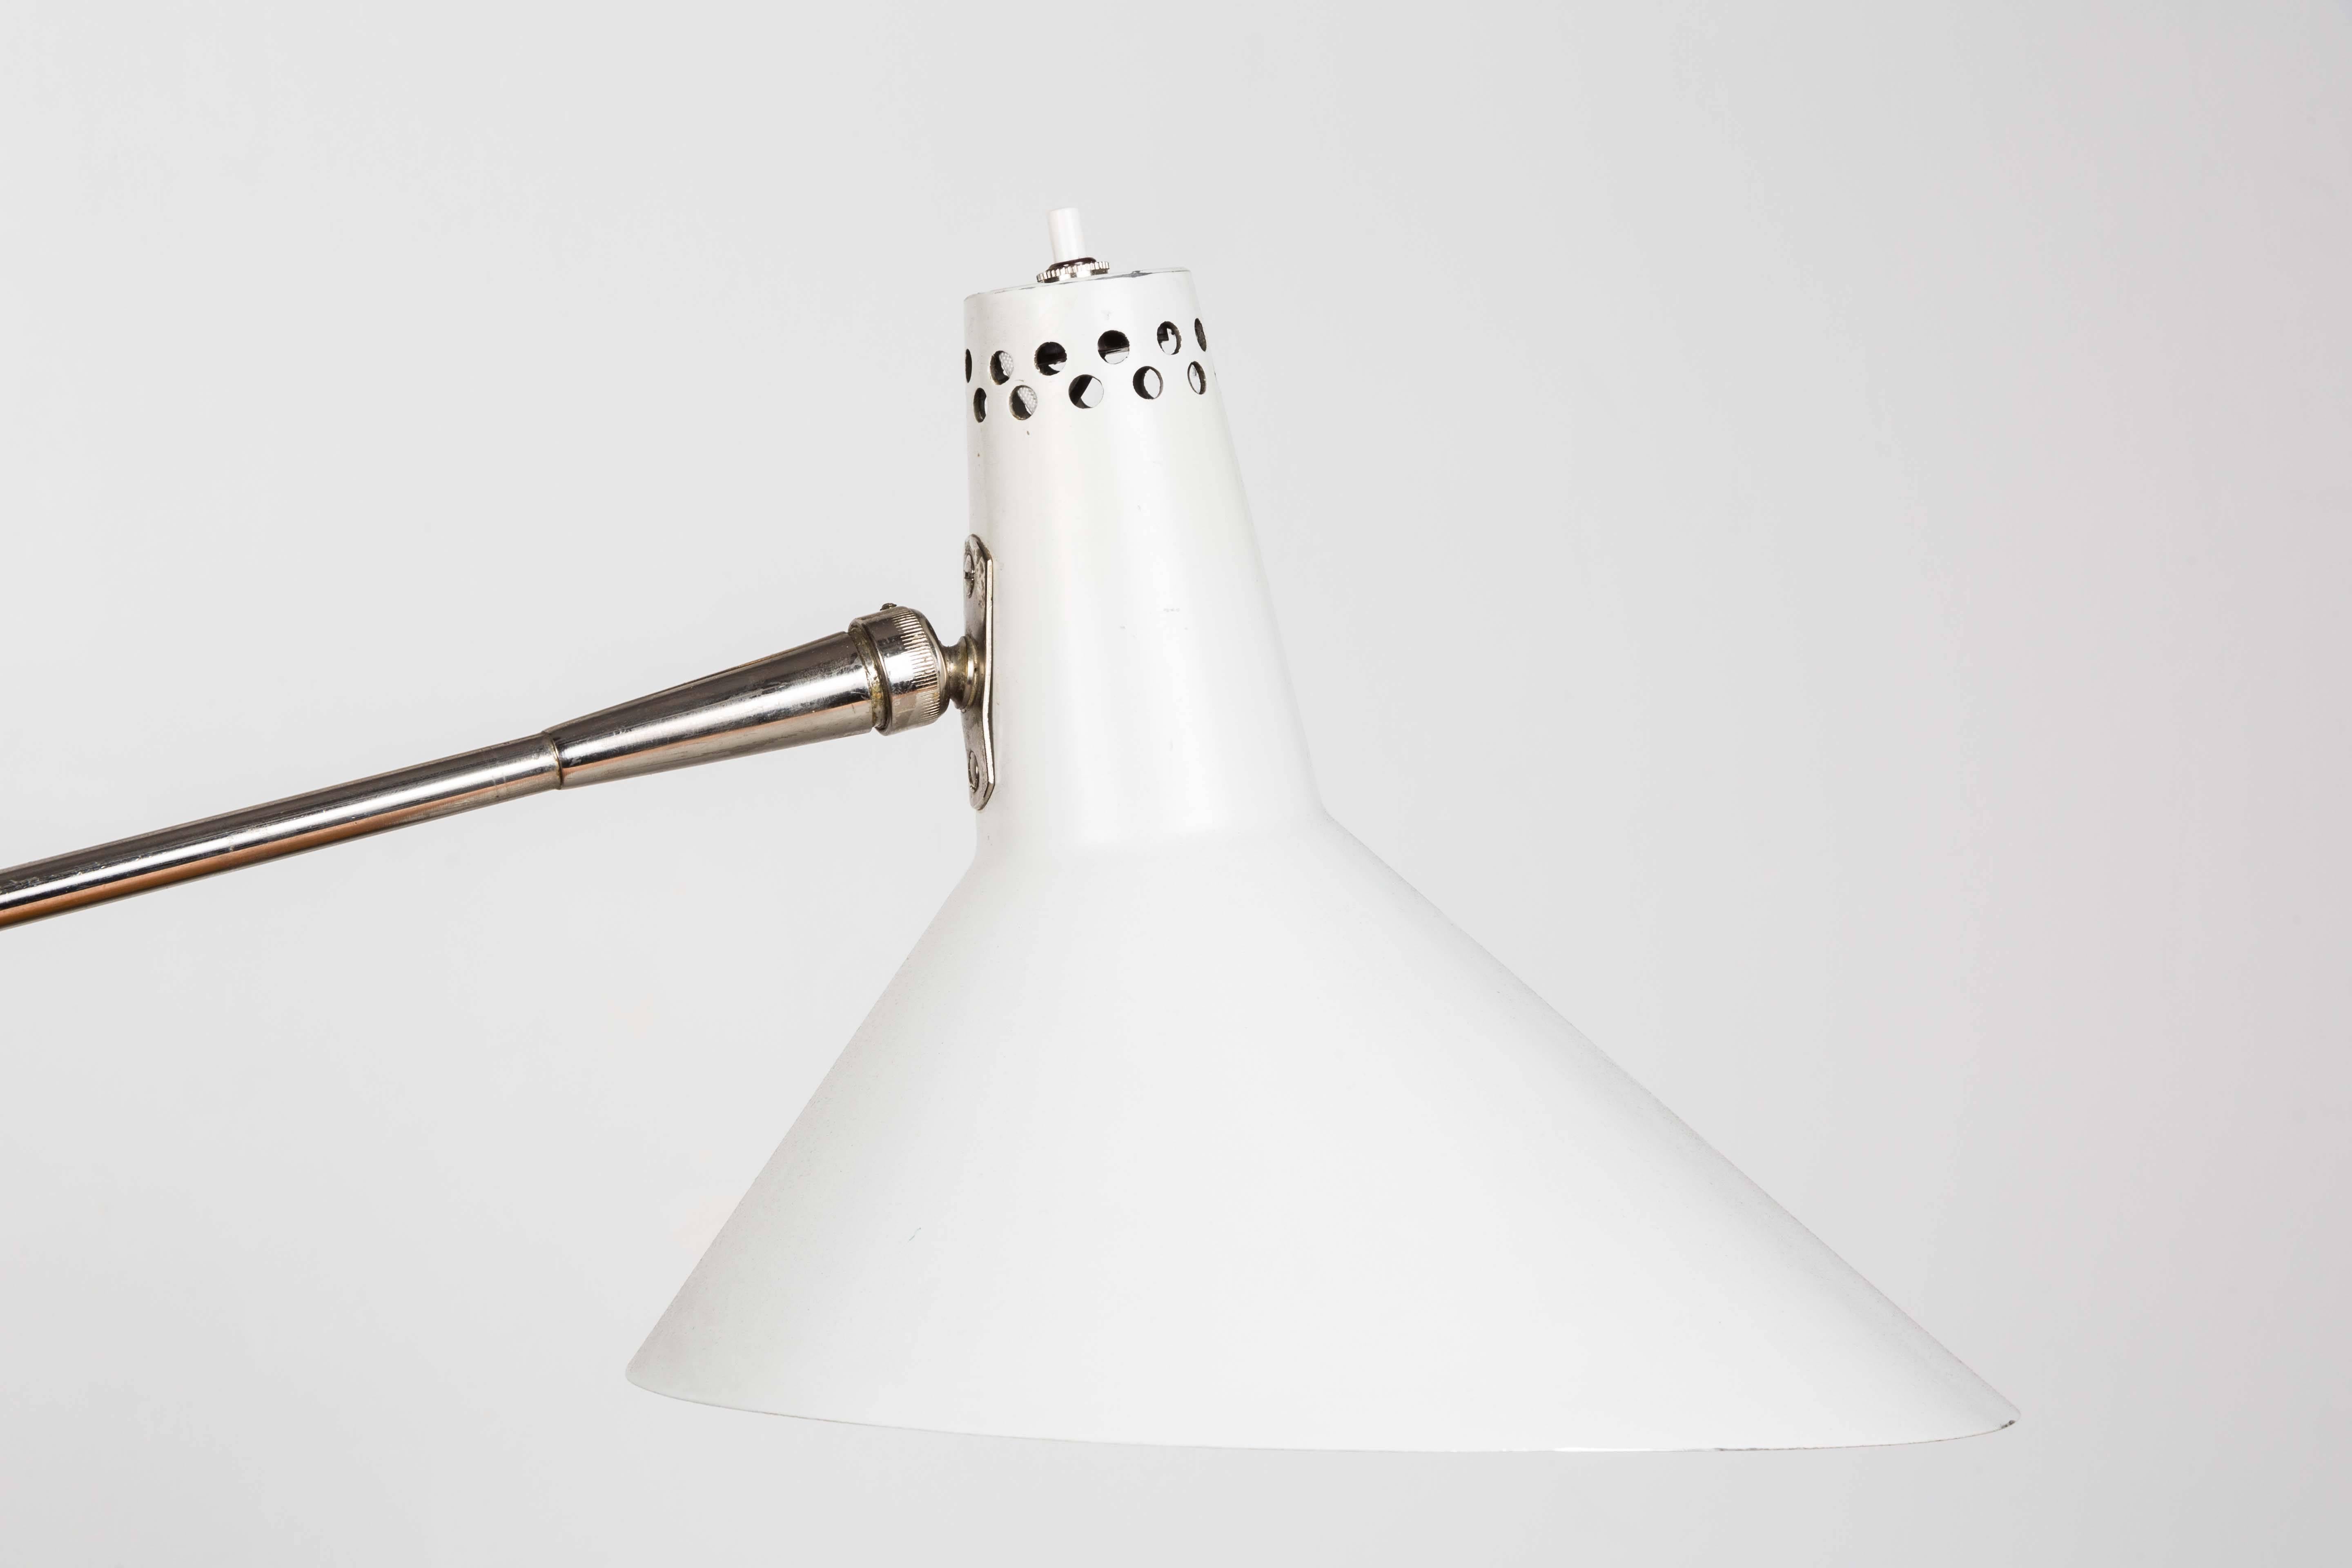 1960s articulating task lamp attributed to Arteluce. An quintessentially 1960s Italian architecturally minimalist design executed in chrome and white enameled metal. Highly adjustable, the Dual-jointed articulating arms extend up to a maximum of 38